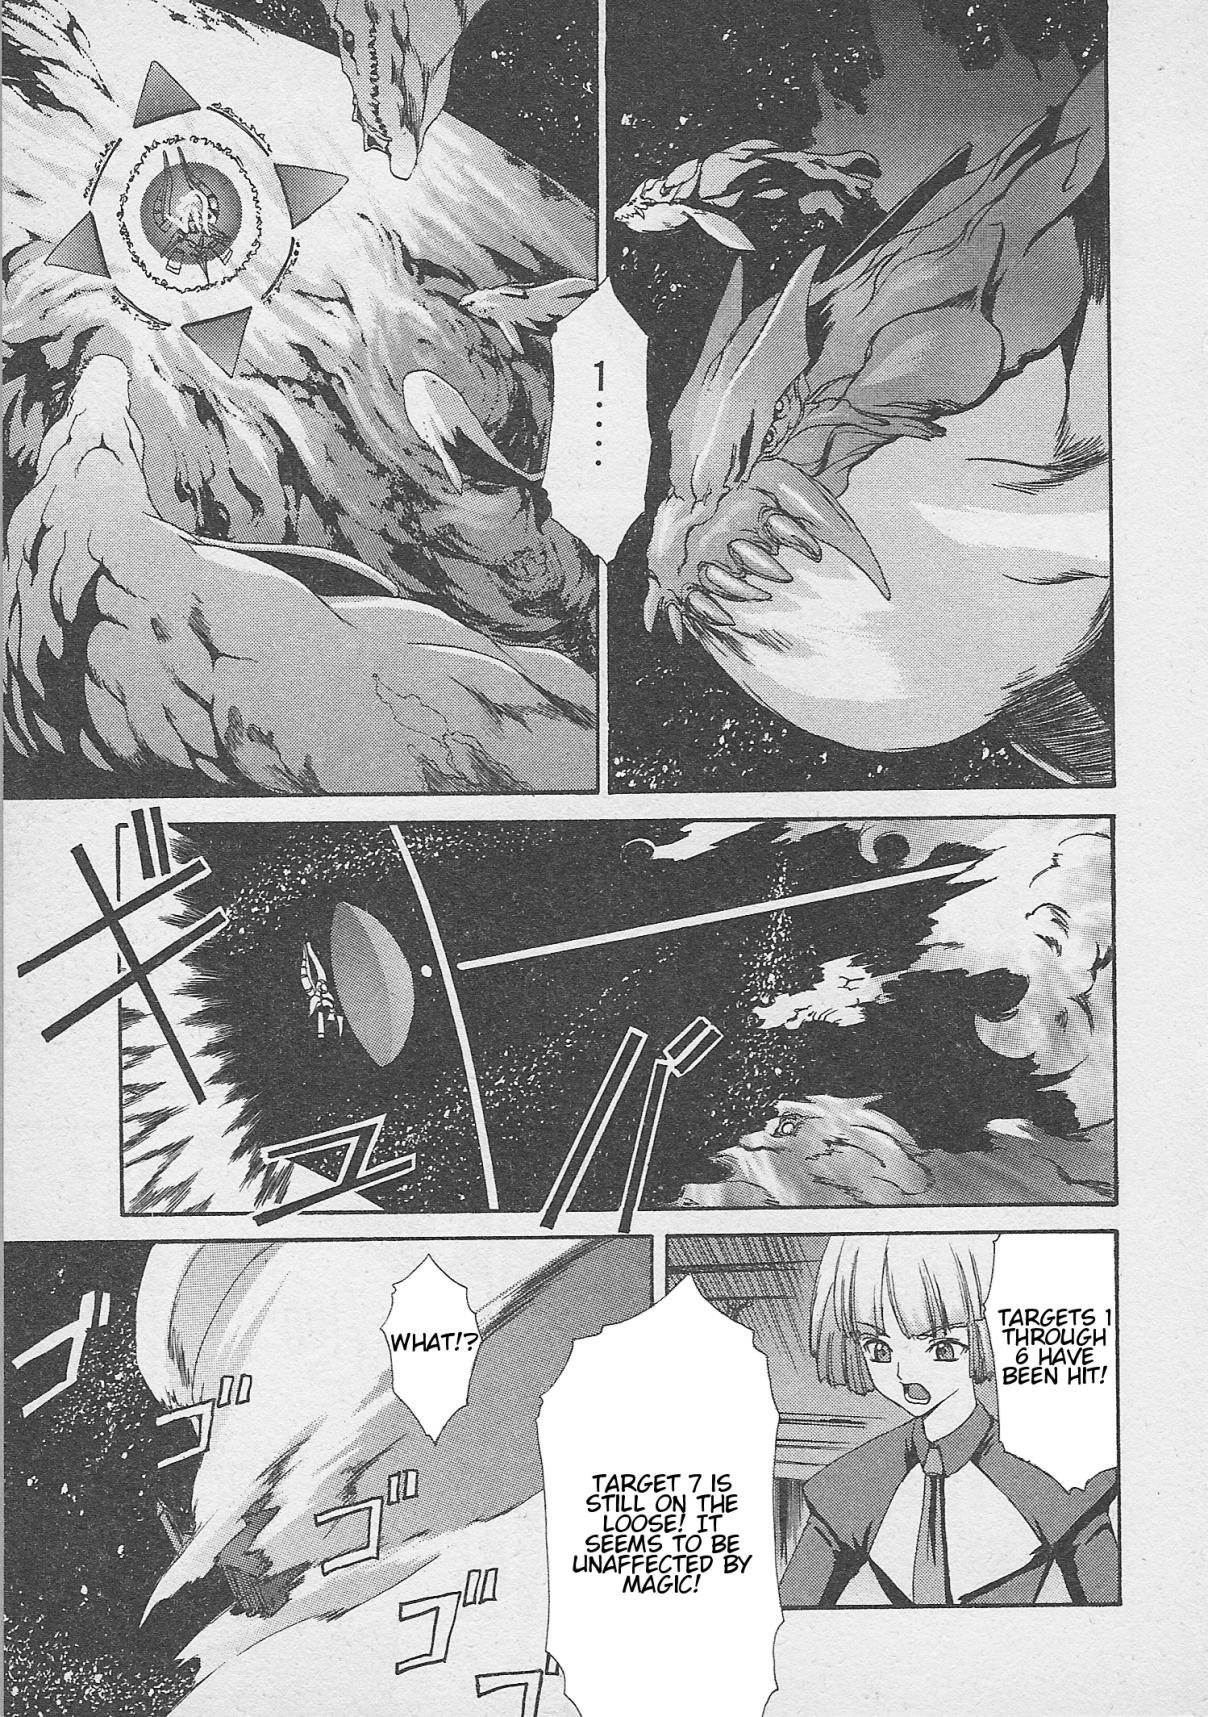 Guilty Gear Xtra Vol. 1 Ch. 8 The Ship That Floats Among the Stars and the Metallic Island That Flies in the Sky